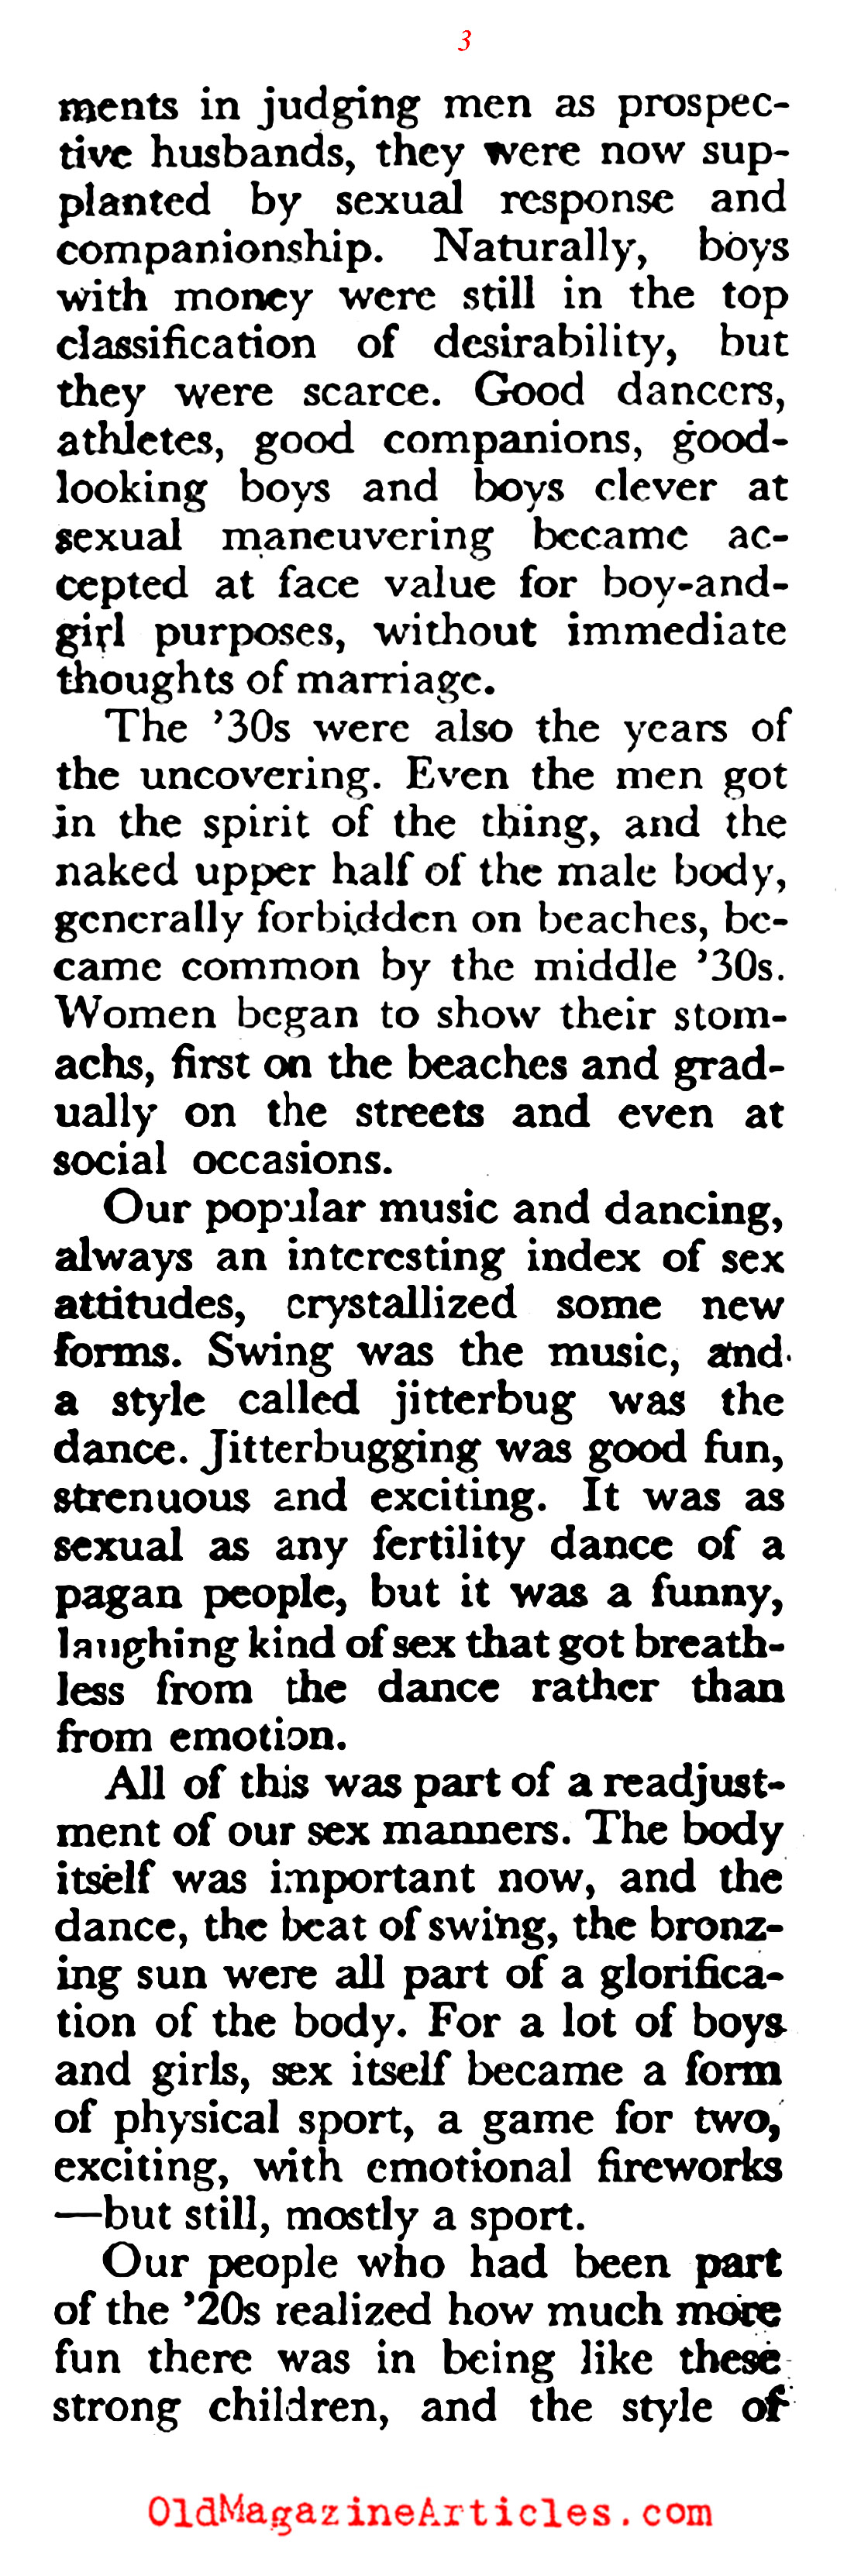  The Great Depression and the Sexes (Coronet Magazine, 1947)